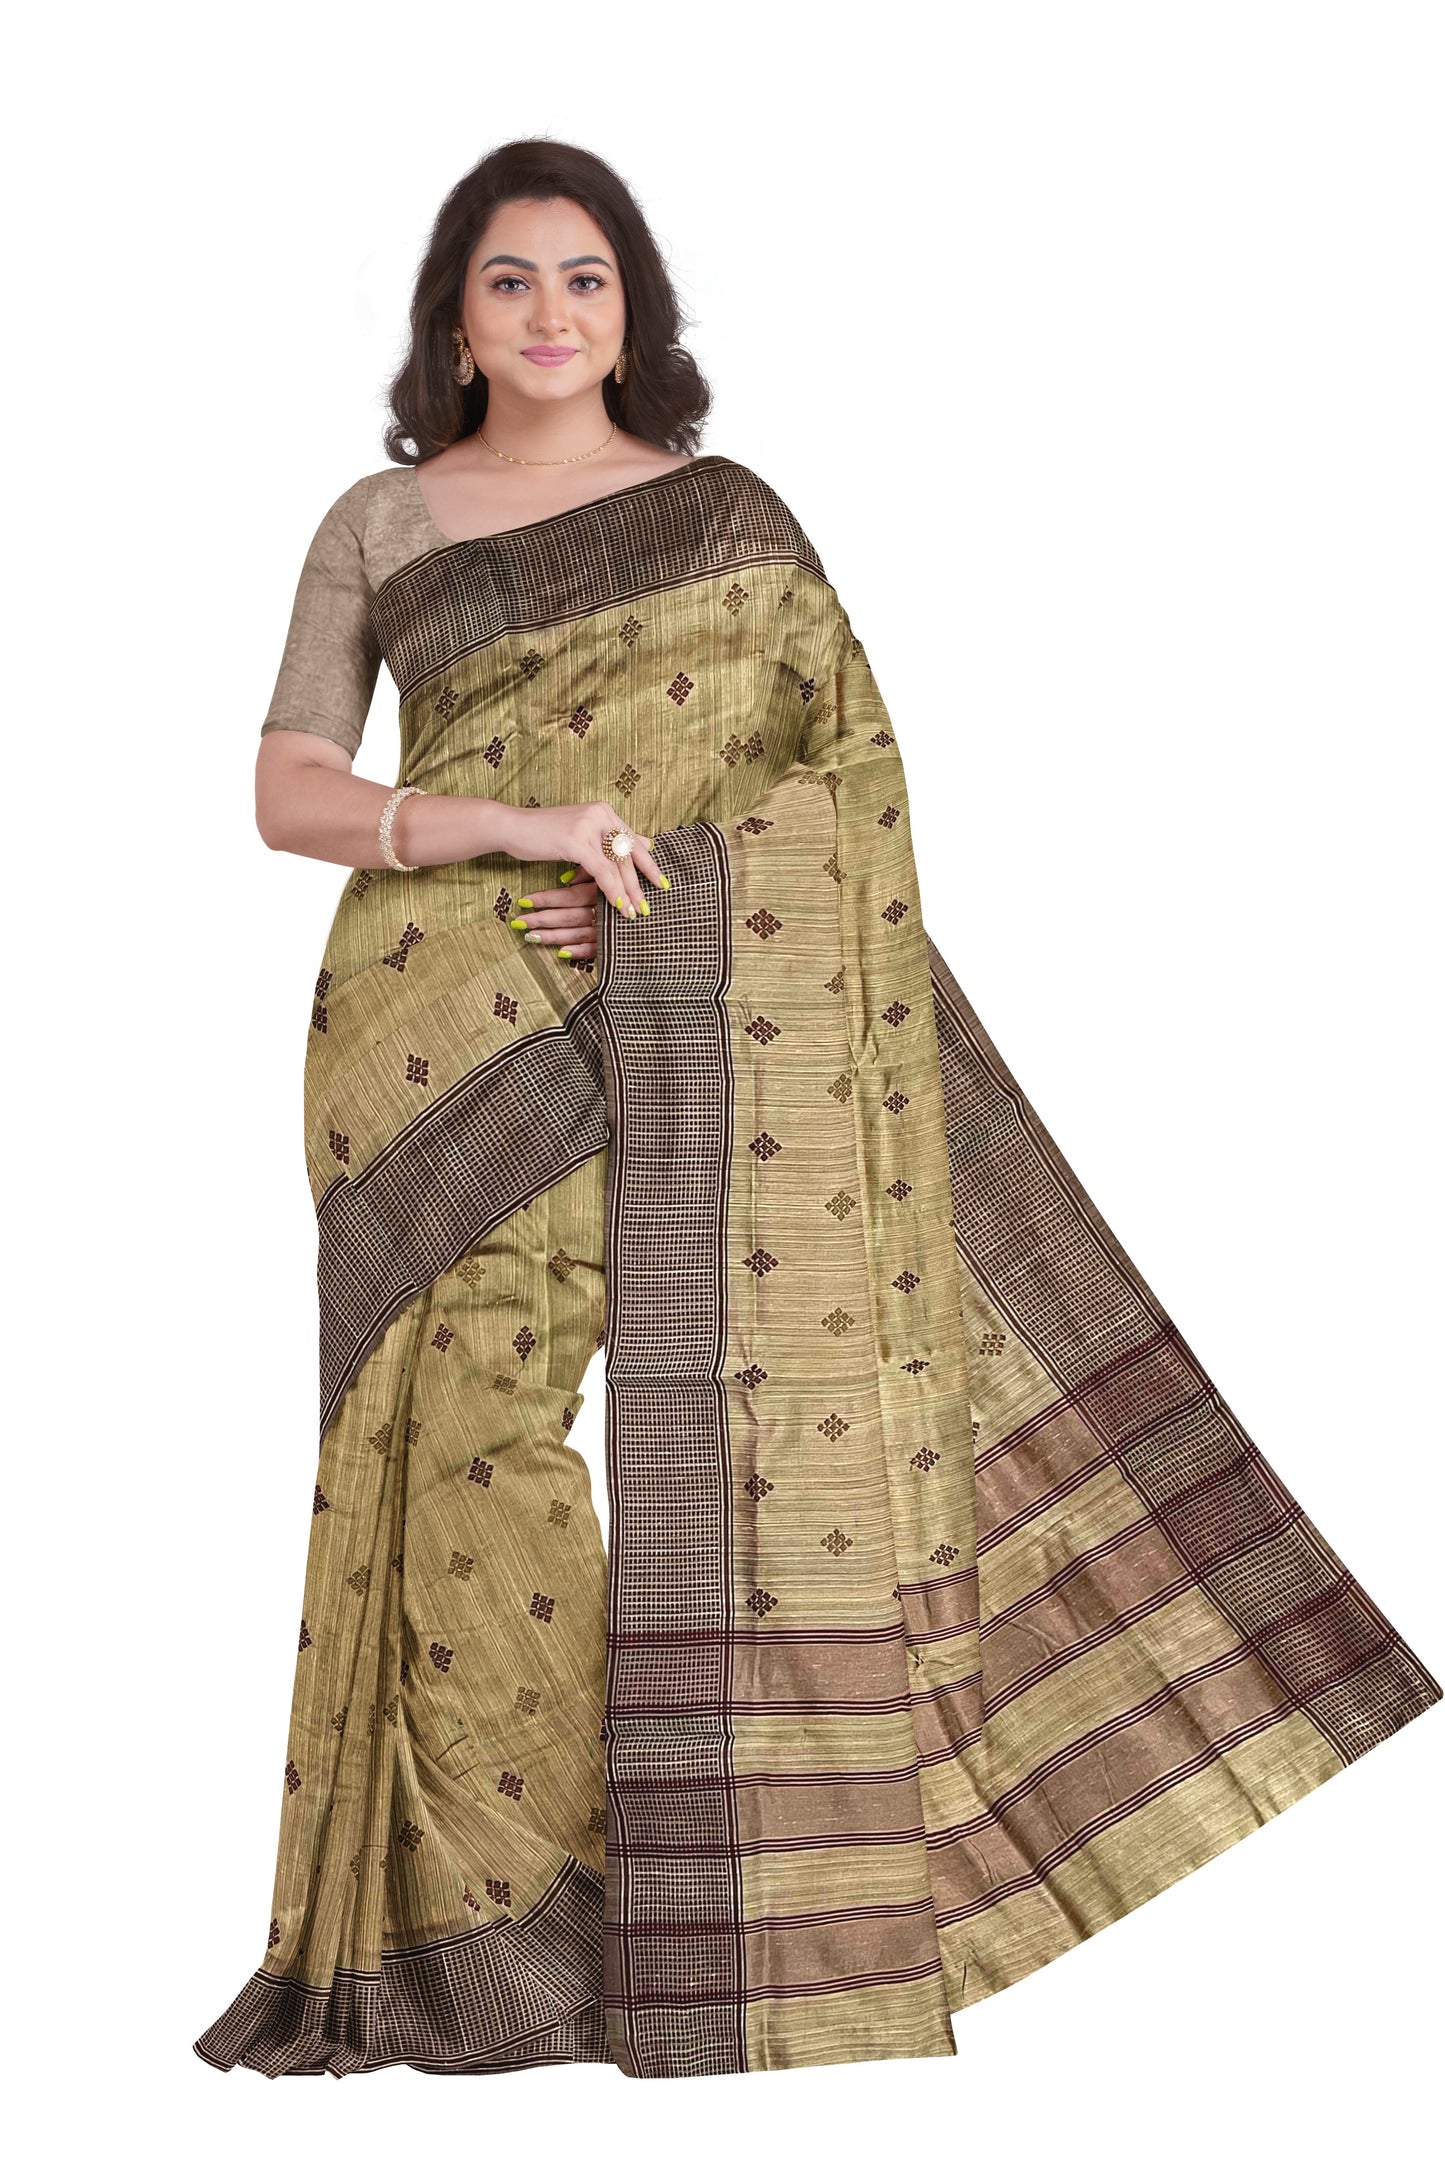 Southloom Light Brown Semi Sik Designer Saree with Butta Works and Tassels